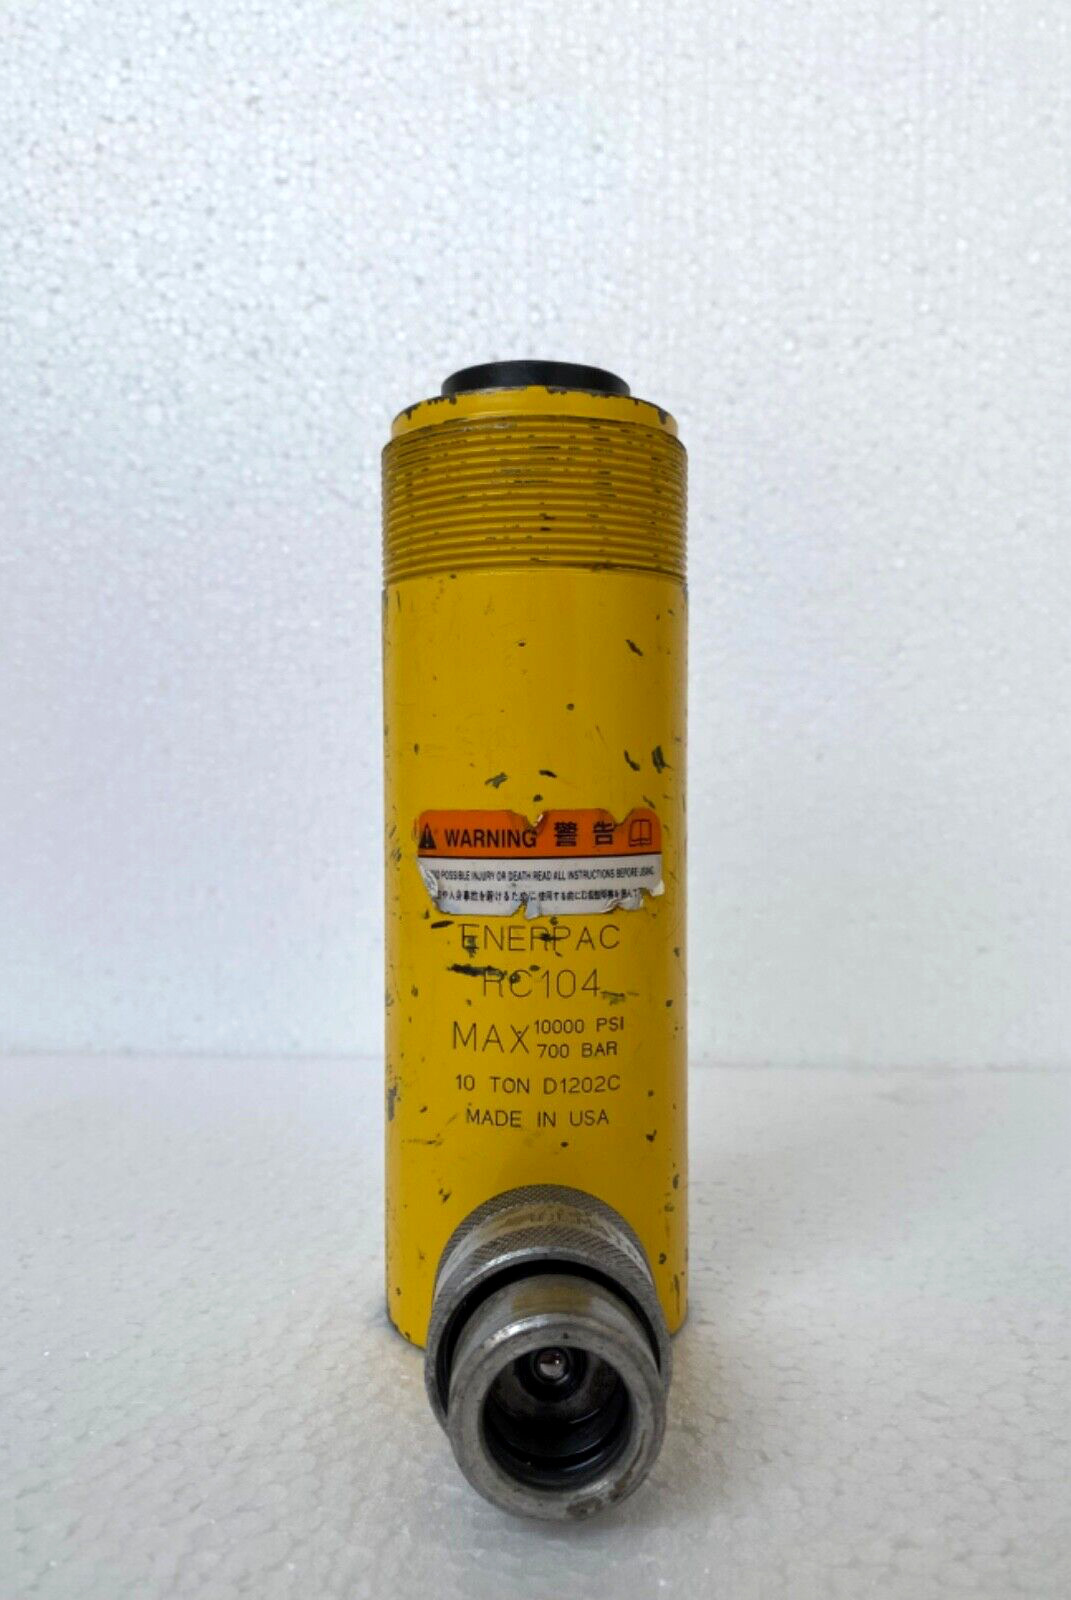 ENERPAC RC104 HYDRAULIC CYLINDER 10TON 4INCH STROKE 10.000PSI 700BAR MADE IN USA